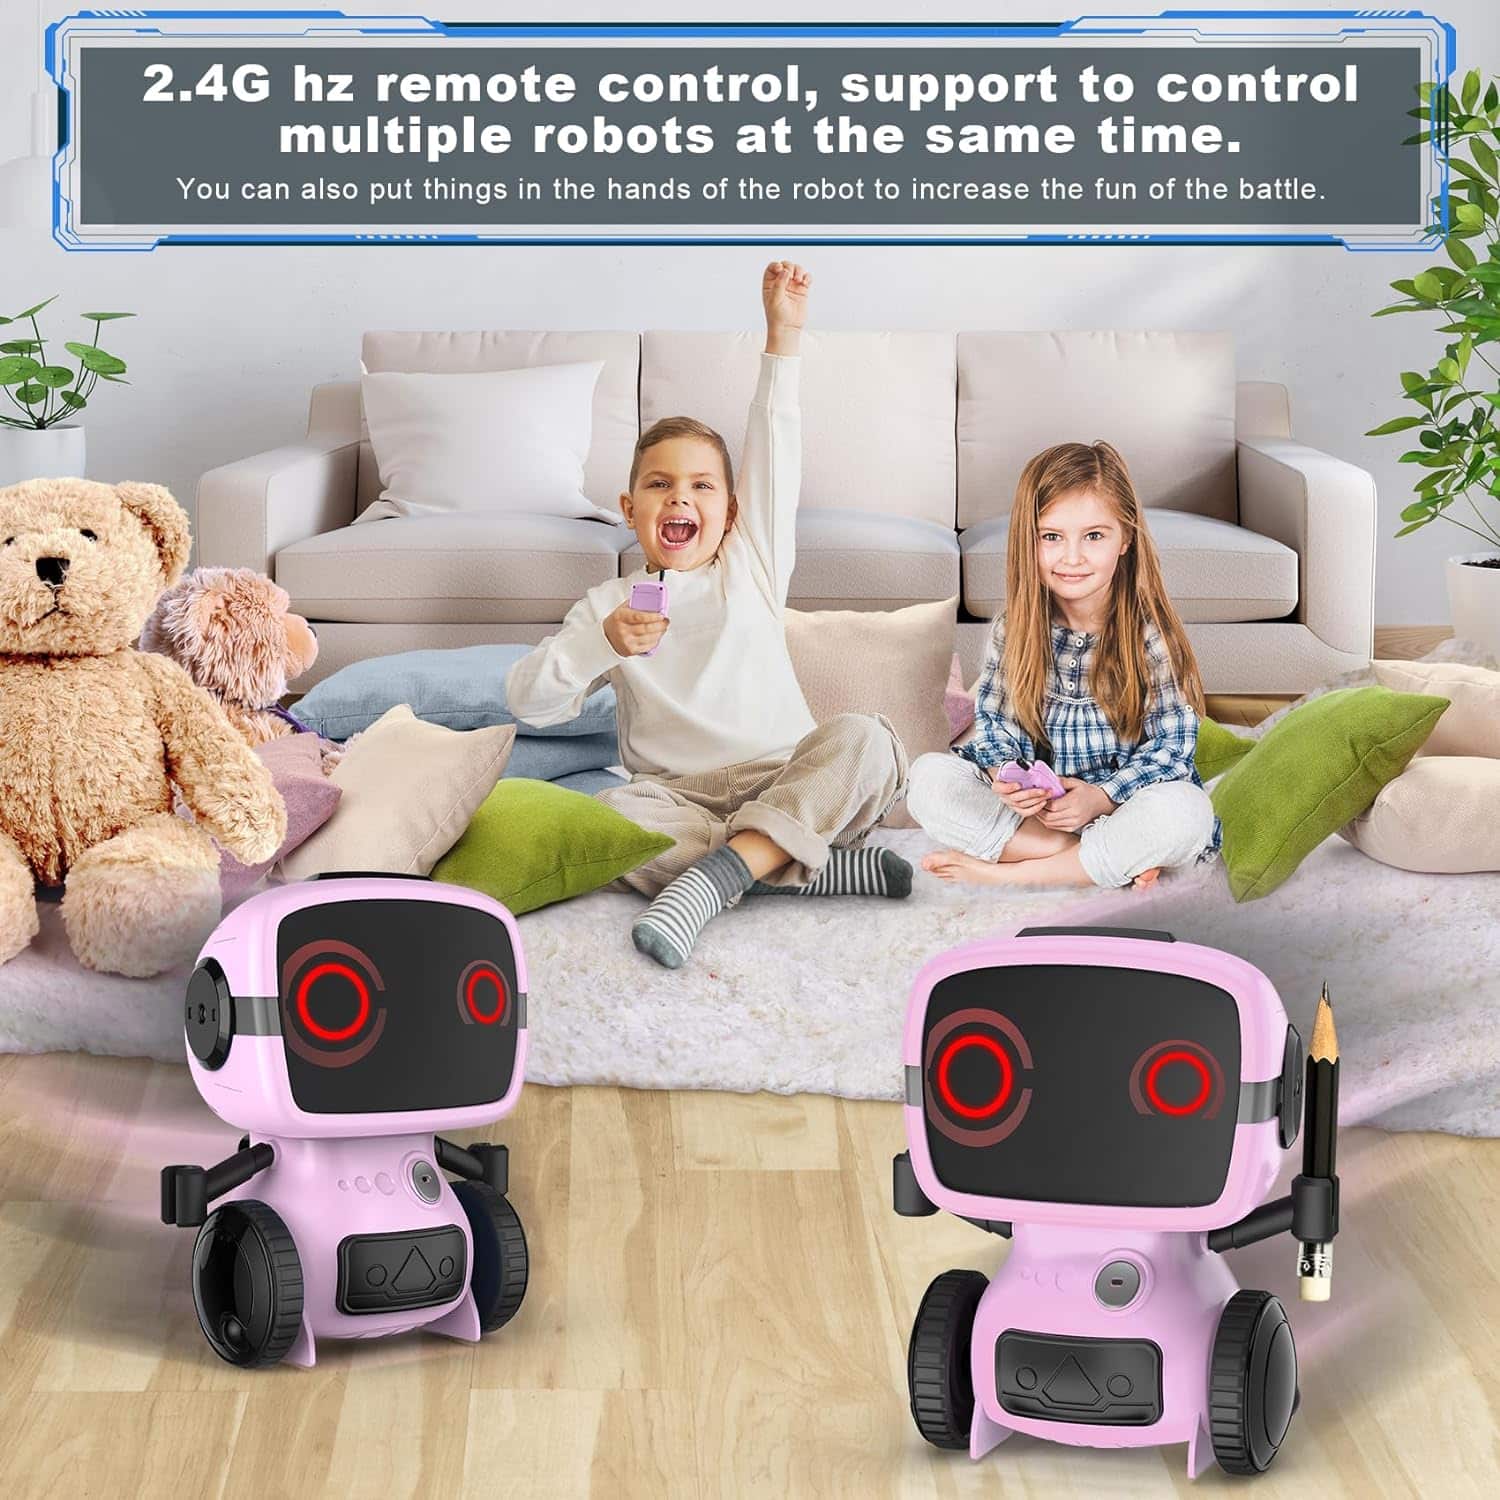 Dandist Robot Toys for Girls: A Fun and Educational Review